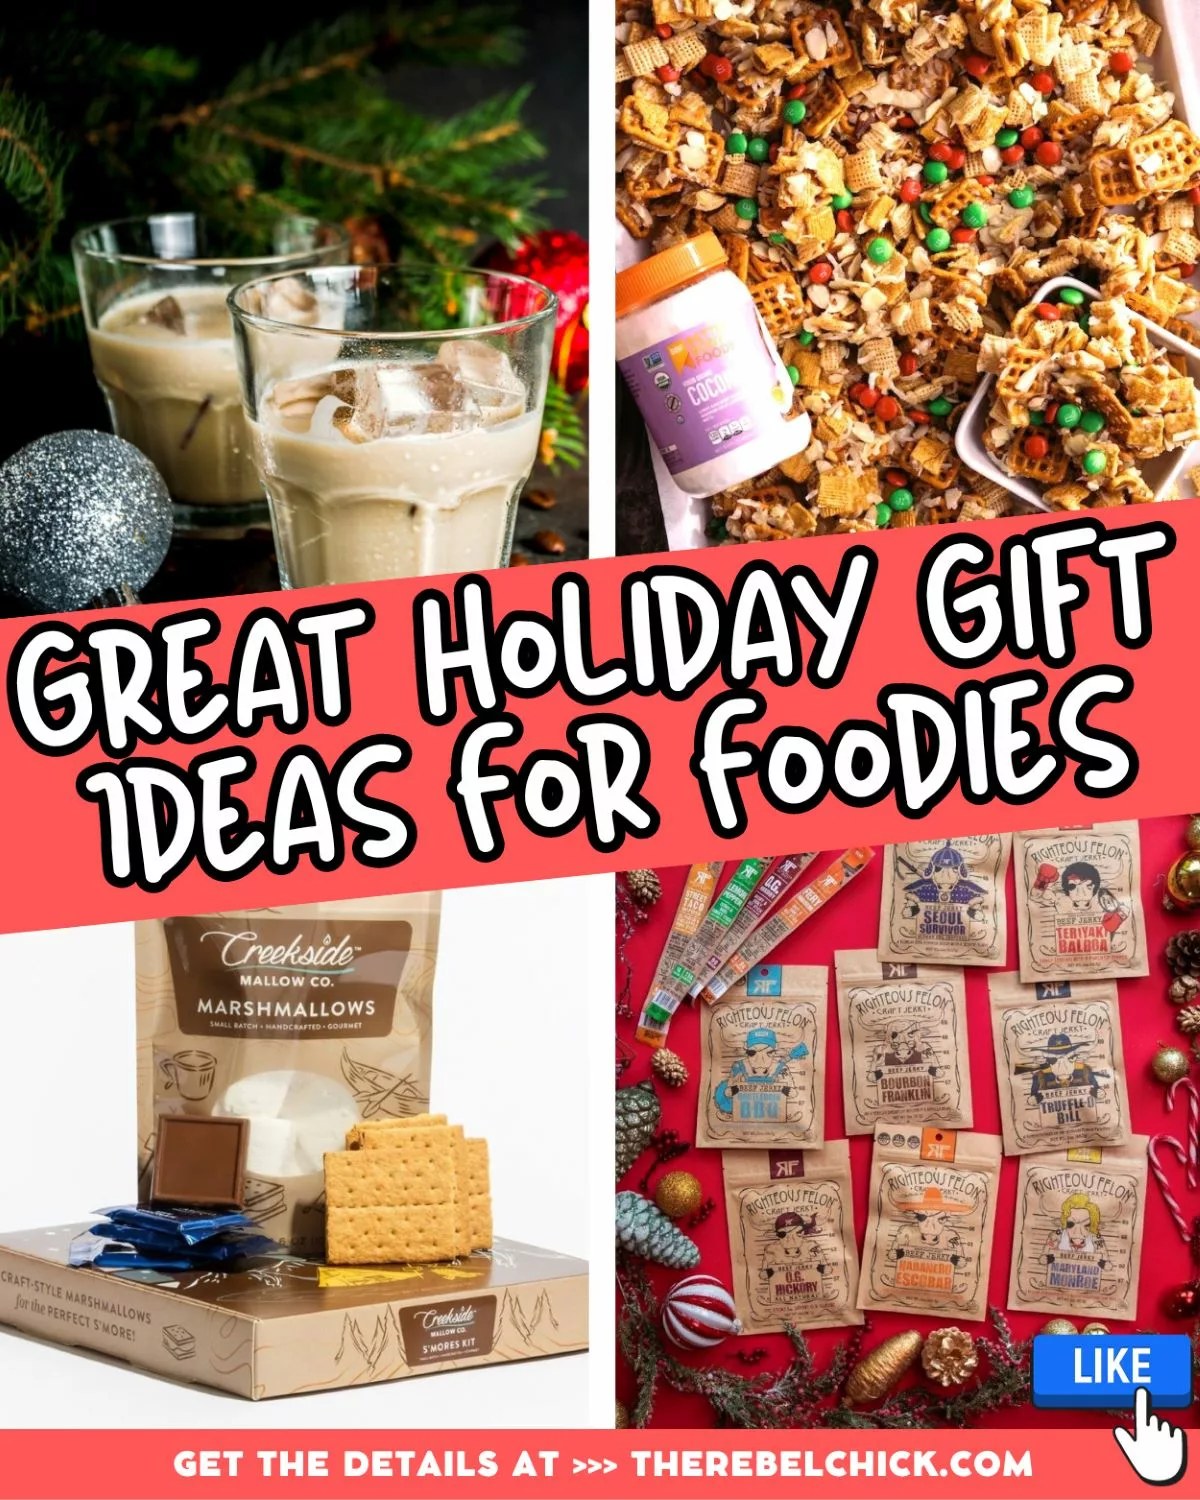 Great Holiday Gift Ideas For Foodies